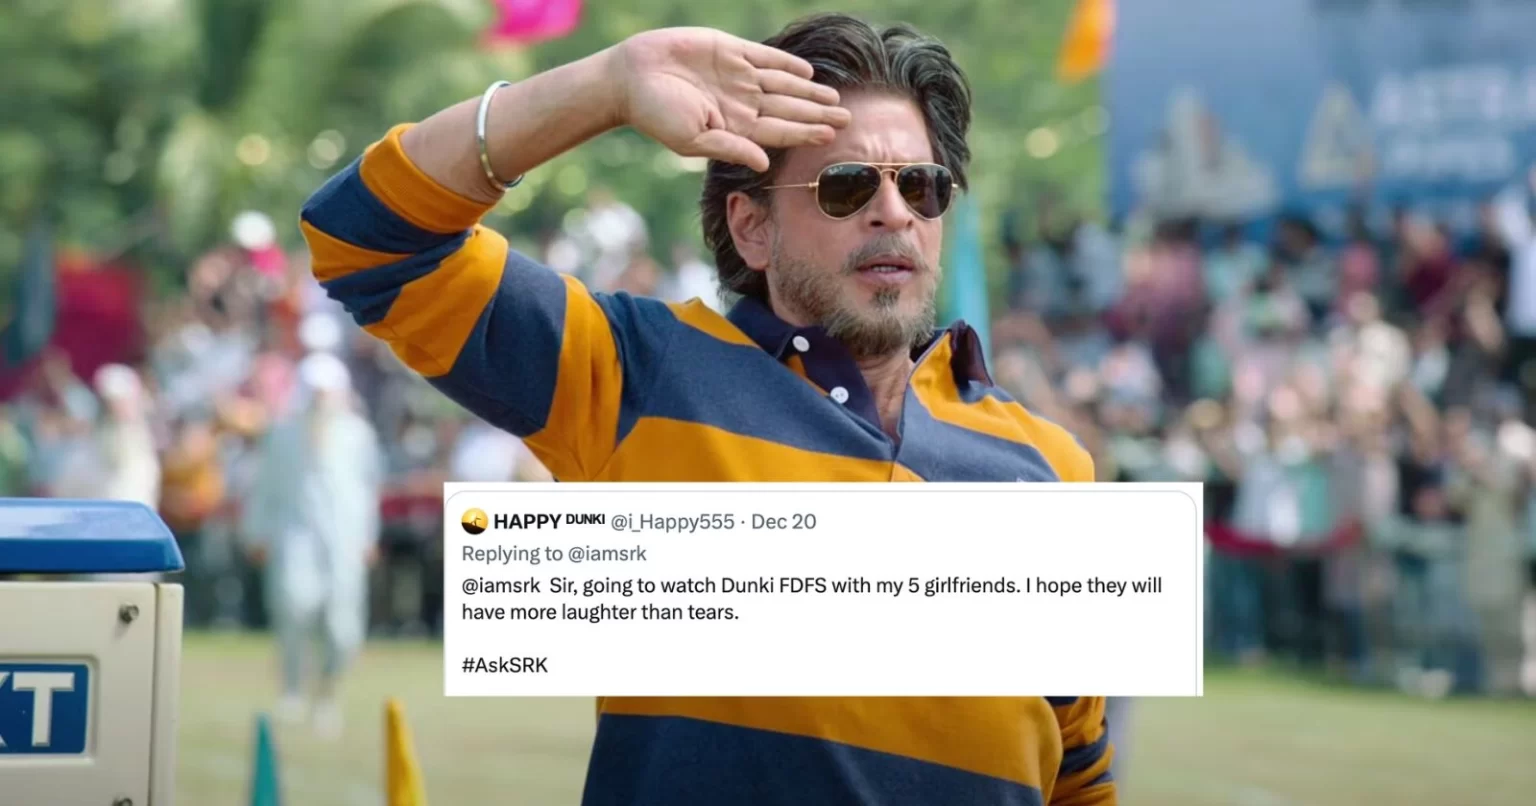 Shah Rukh Khan Responds To A Guy Who Said That He Is Going To Watch Dunki With His 5 Girlfriends